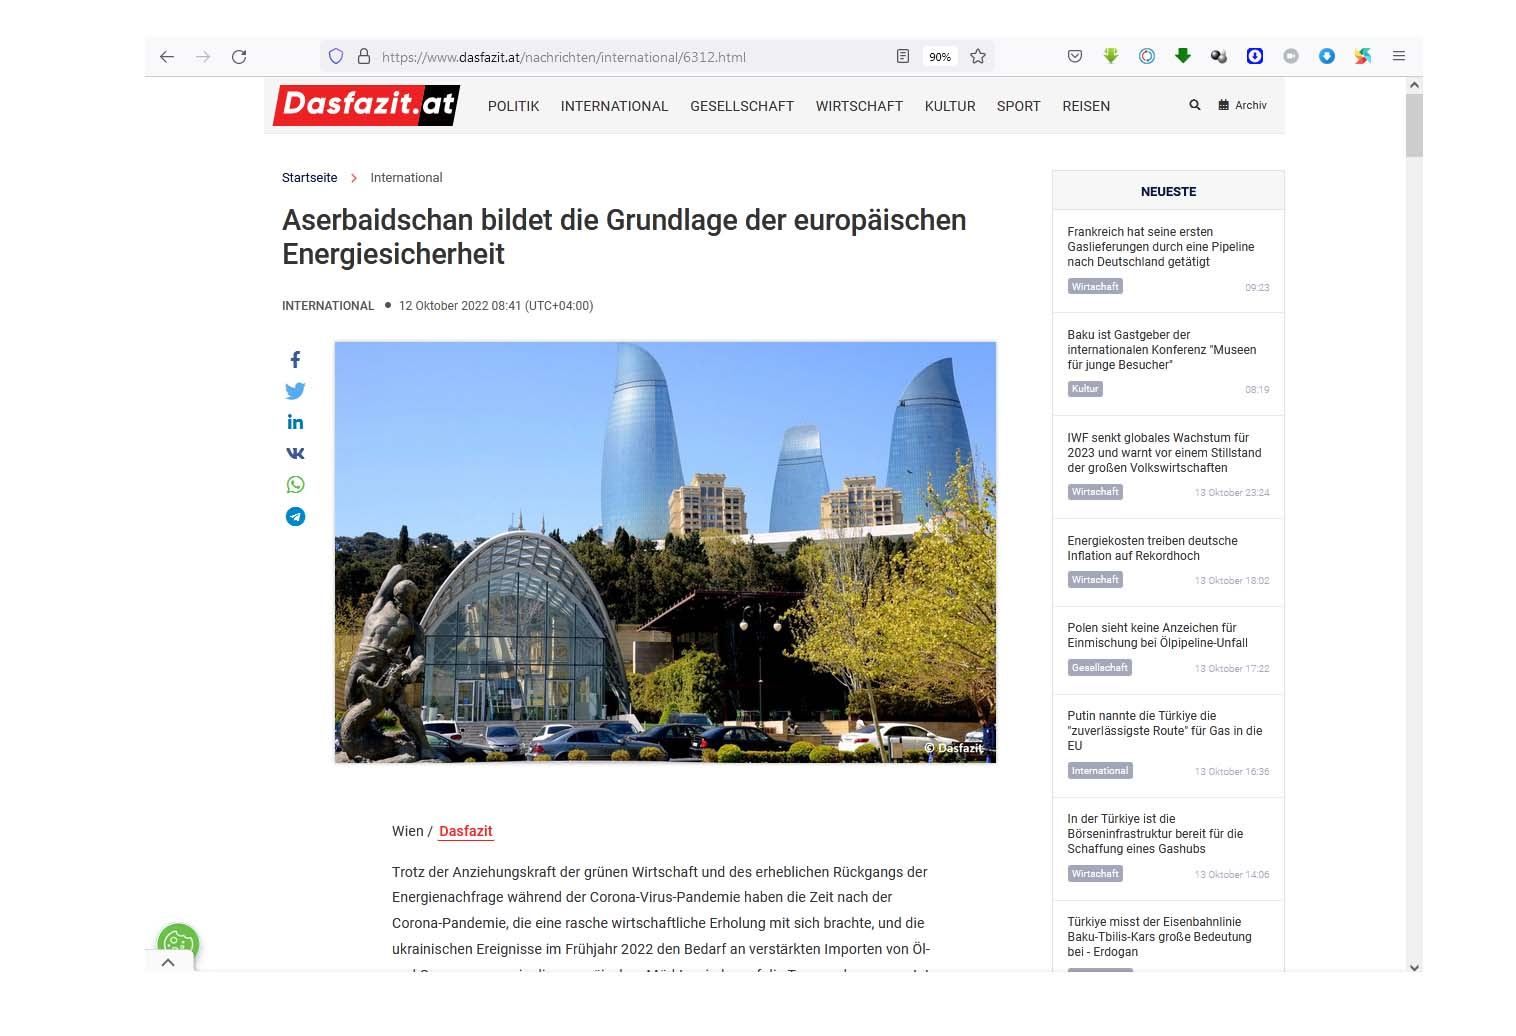 Austrian media publishes article on Azerbaijan's growing role in energy security of Europe